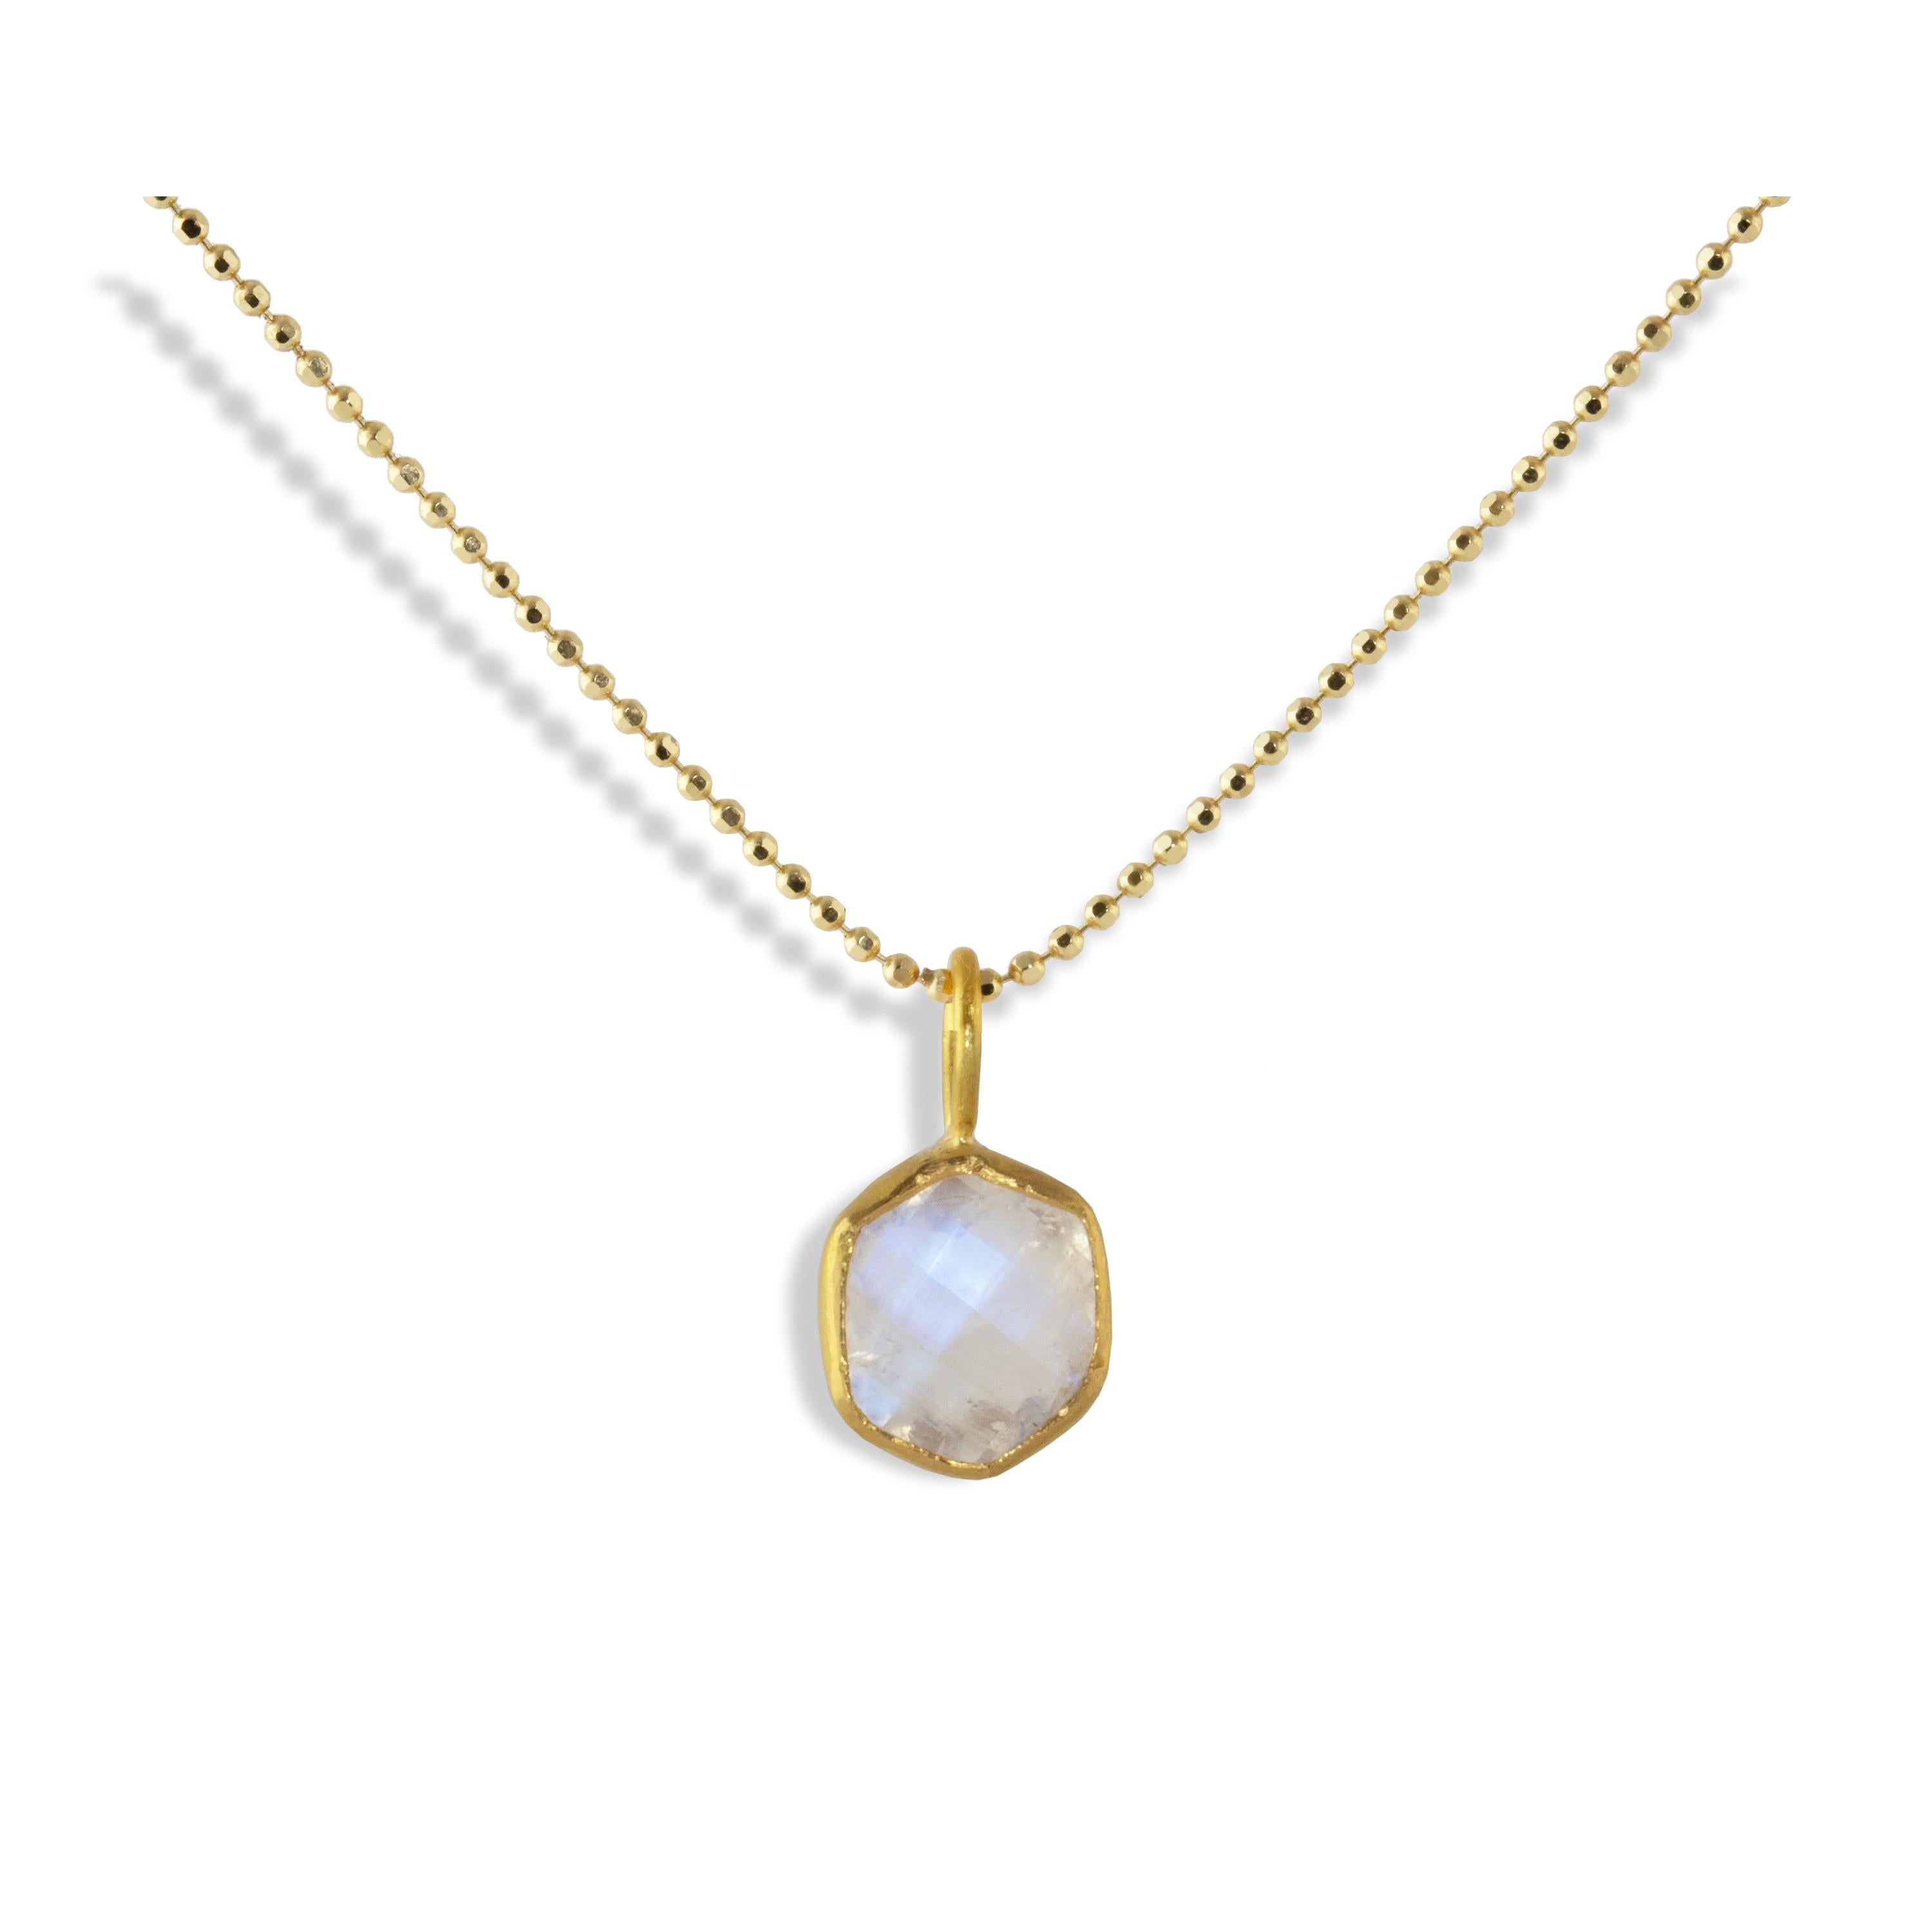 Rainbow Moonstone octagon Pendant set in 22k gold.  Rainbow Moonstone enhances intuition, promotes inspiration , success and good fortune in love and business matters.  
Moonstone is a checkerboard cut.  
One of a kind.

Gold Chain options are